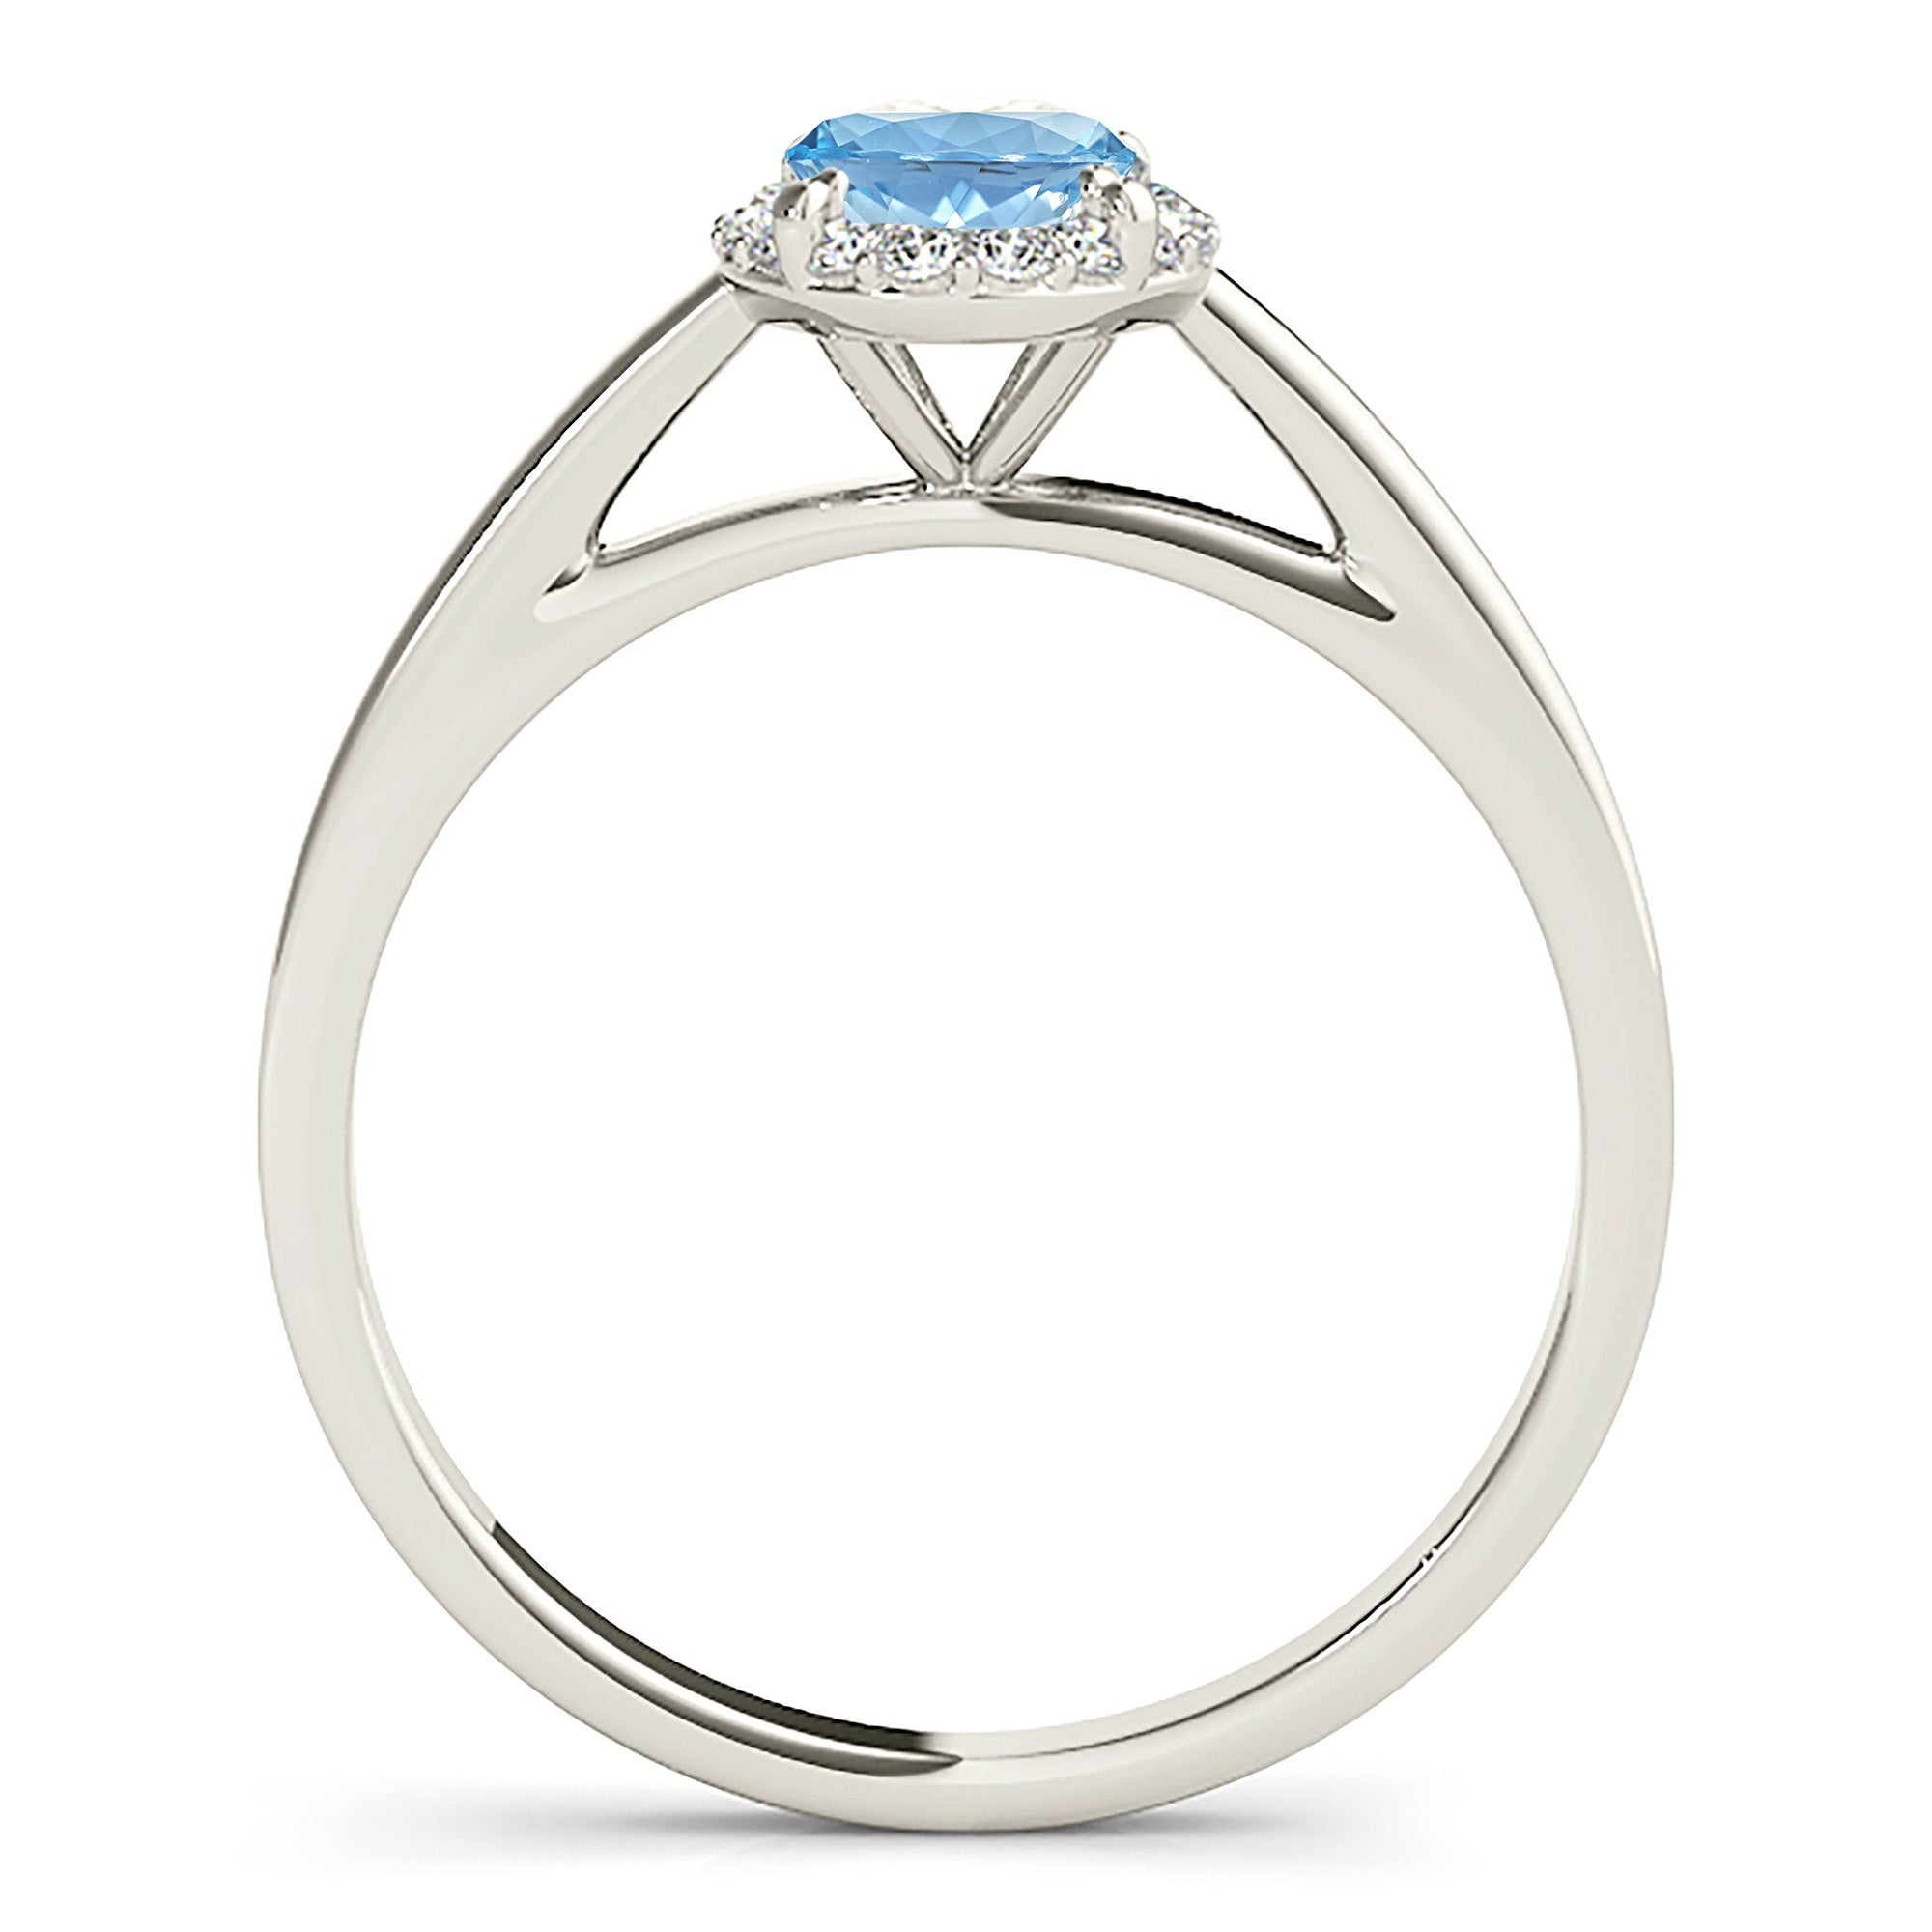 1.27 ct. Genuine Oval Aquamarine Ring With 0.20 ctw. Diamond Halo and Solid Gold Band | Oval Blue Aquamarine Halo Ring-in 14K/18K White, Yellow, Rose Gold and Platinum - Christmas Jewelry Gift -VIRABYANI